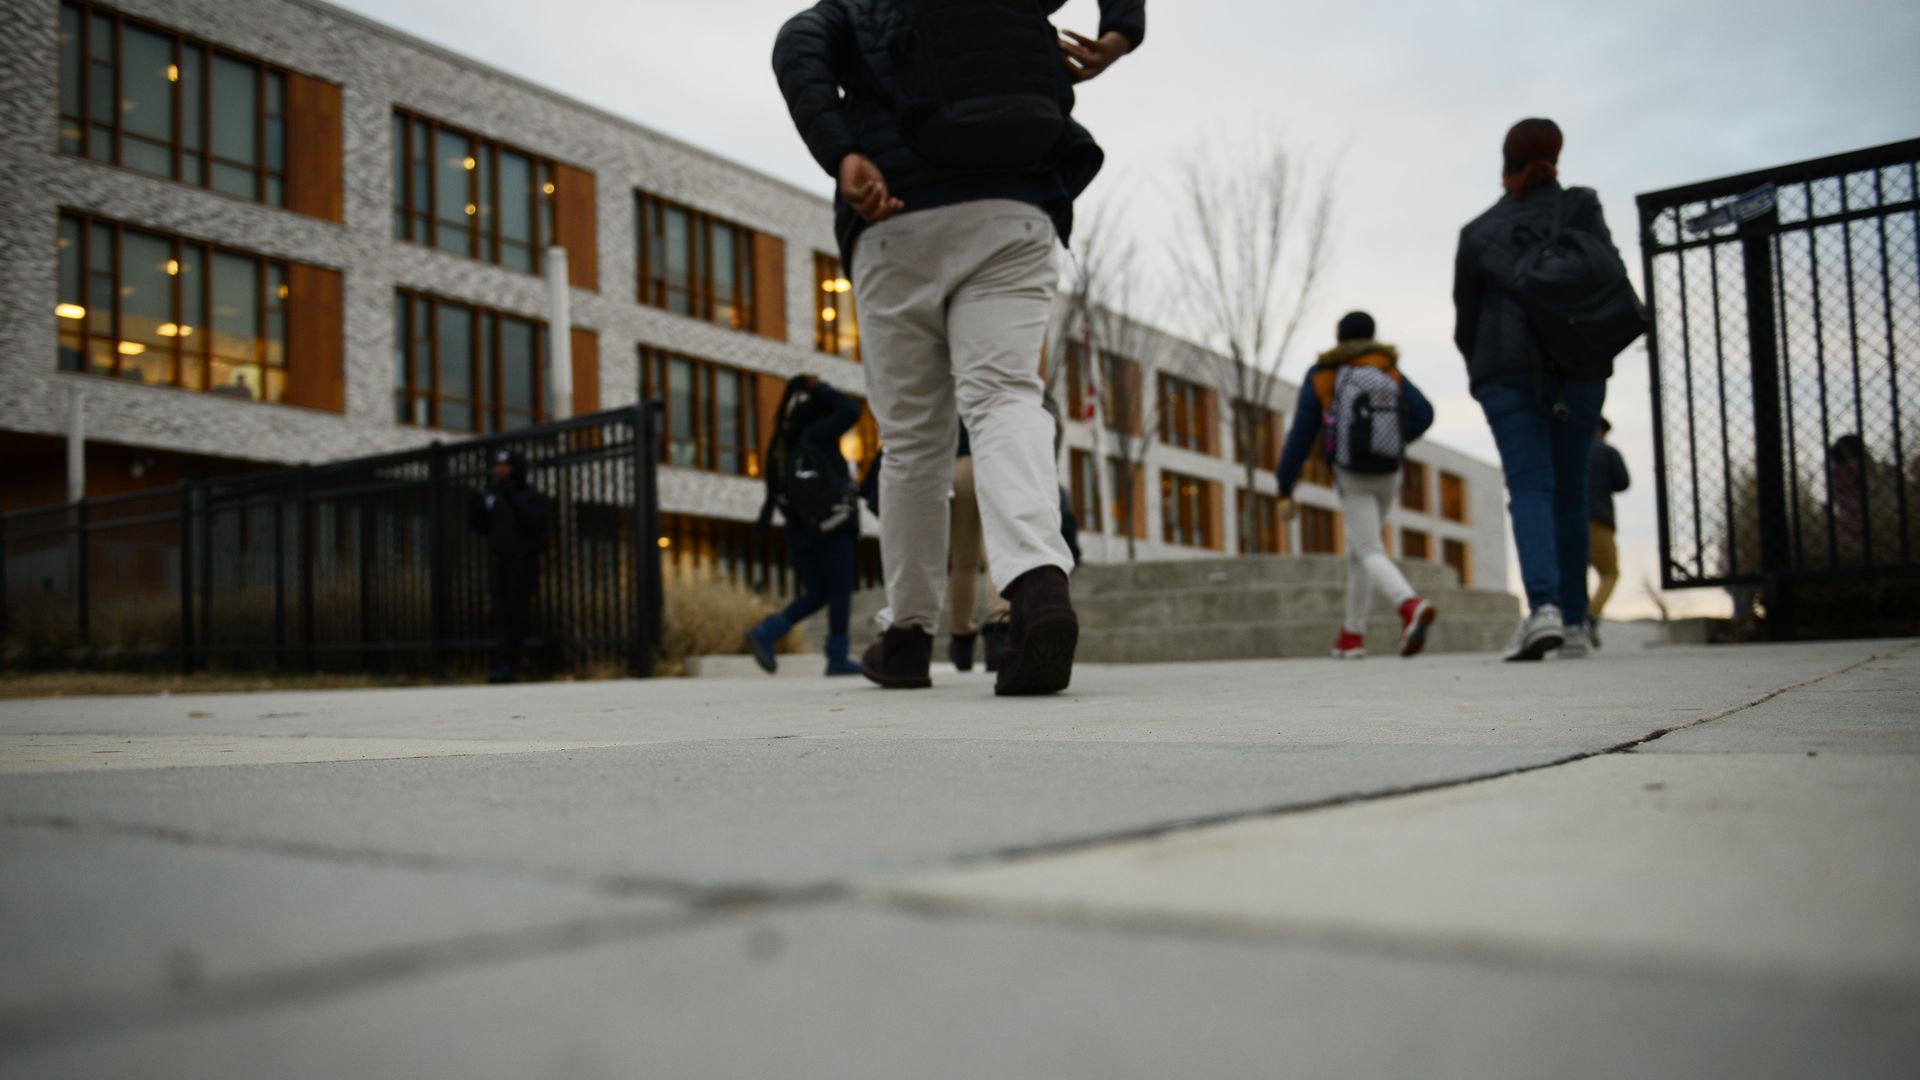 A ground view of students walking into a school building.